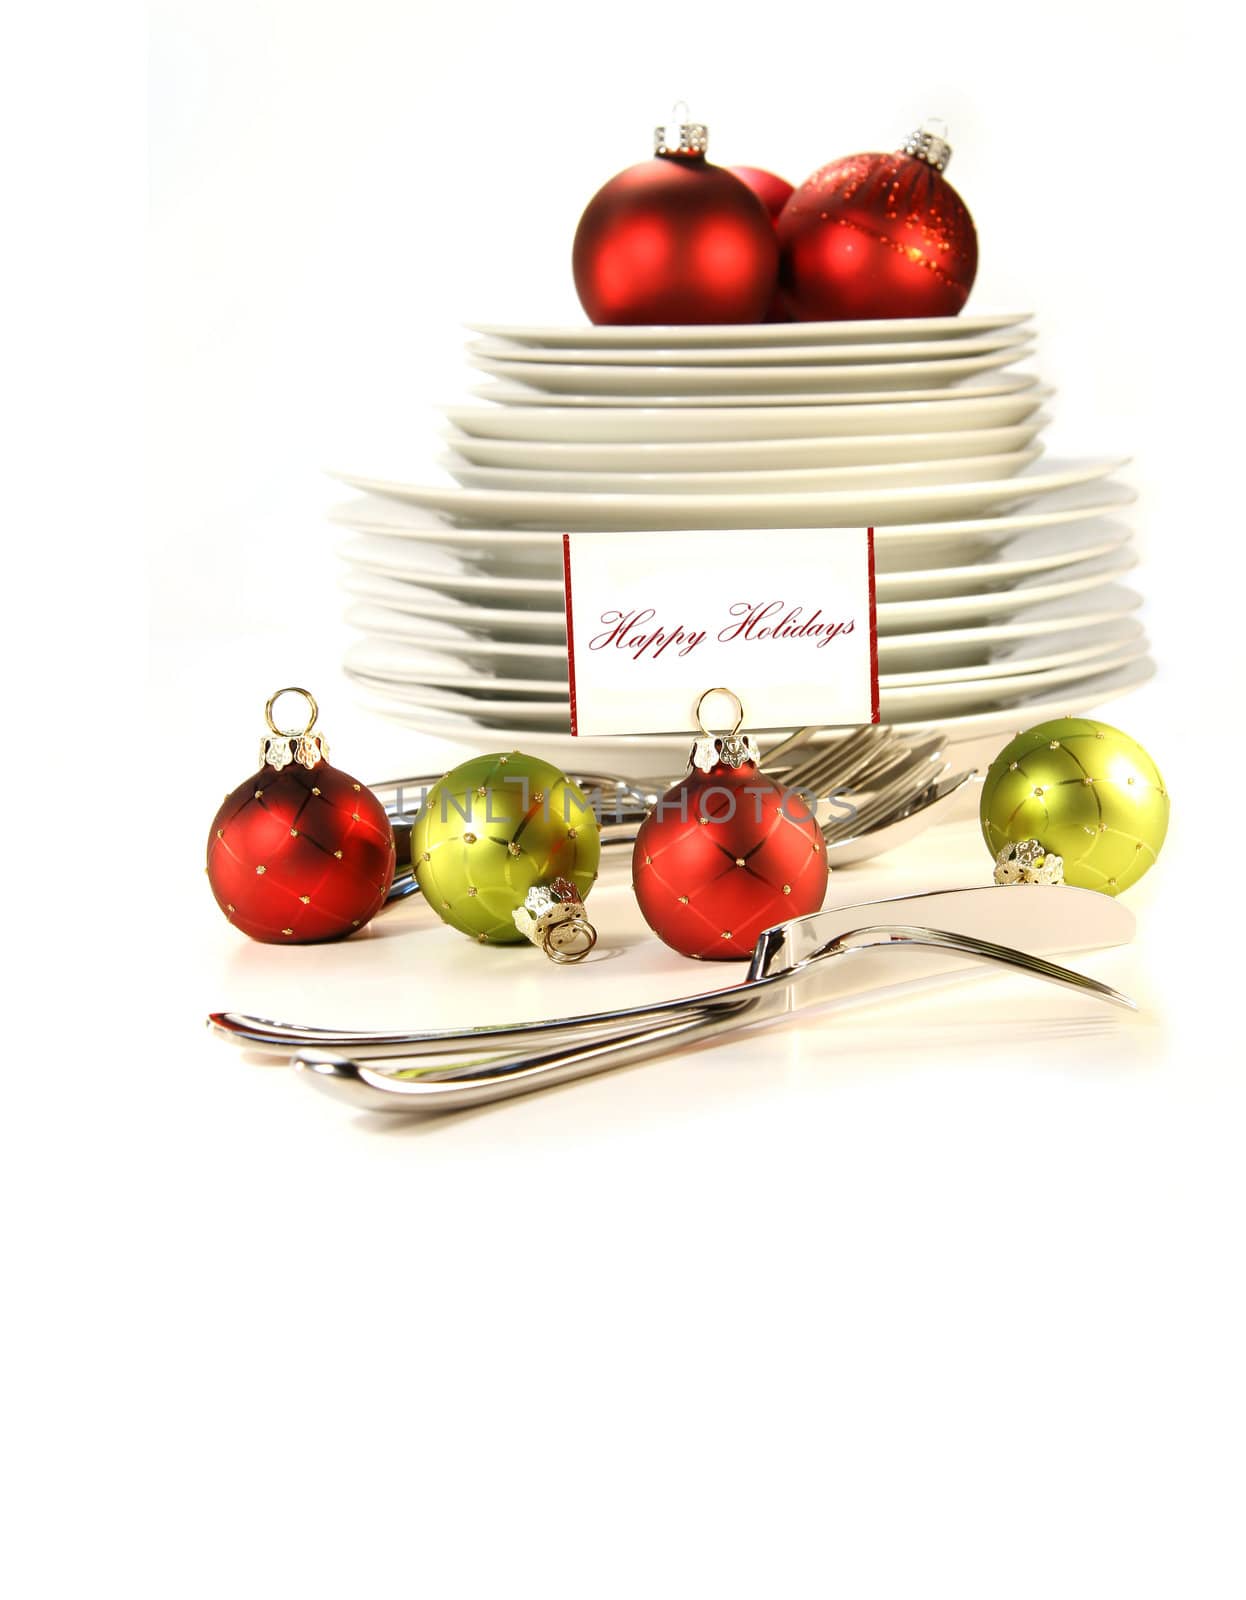 Festive place card holders with plates and cutlery  by Sandralise